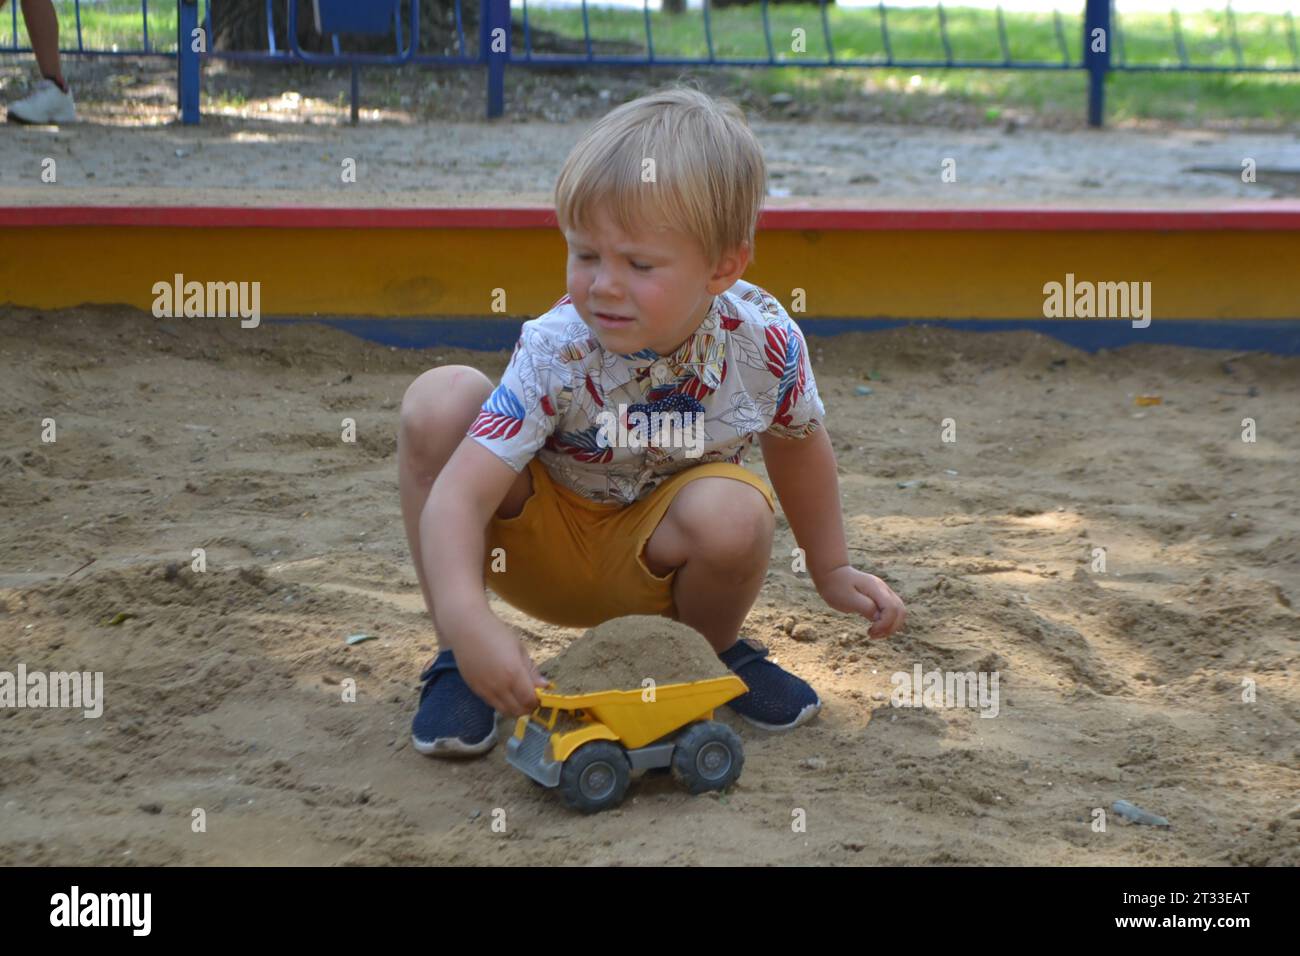 Cute toddler boy playing in sand on outdoor playground. Beautiful baby having fun on sunny warm summer day. High quality photo Stock Photo